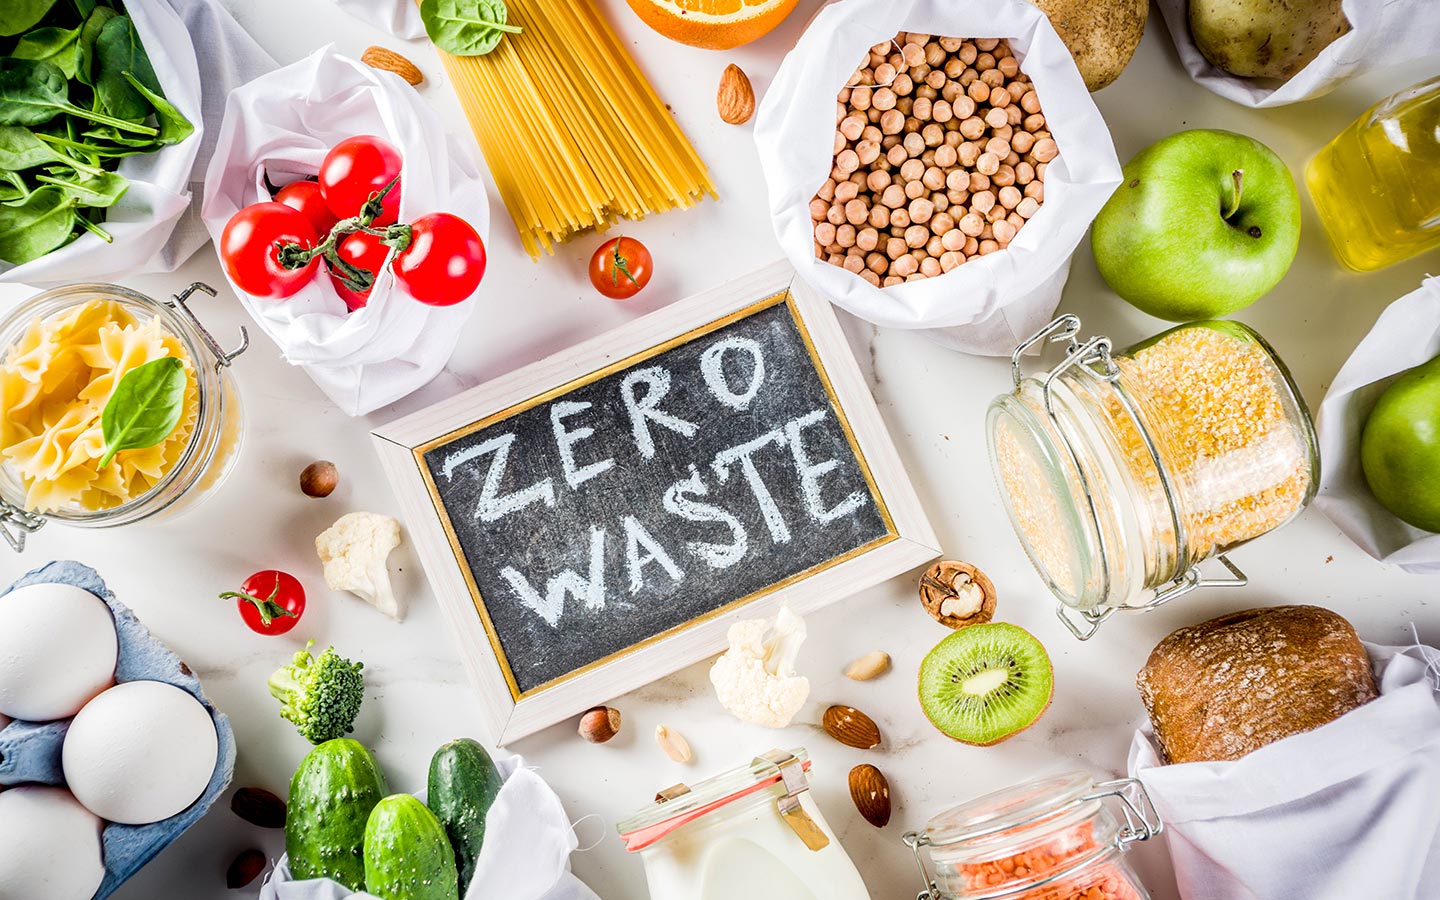 How to reduce food waste is going to be among the topics addressed at TUTTOFOOD 2023